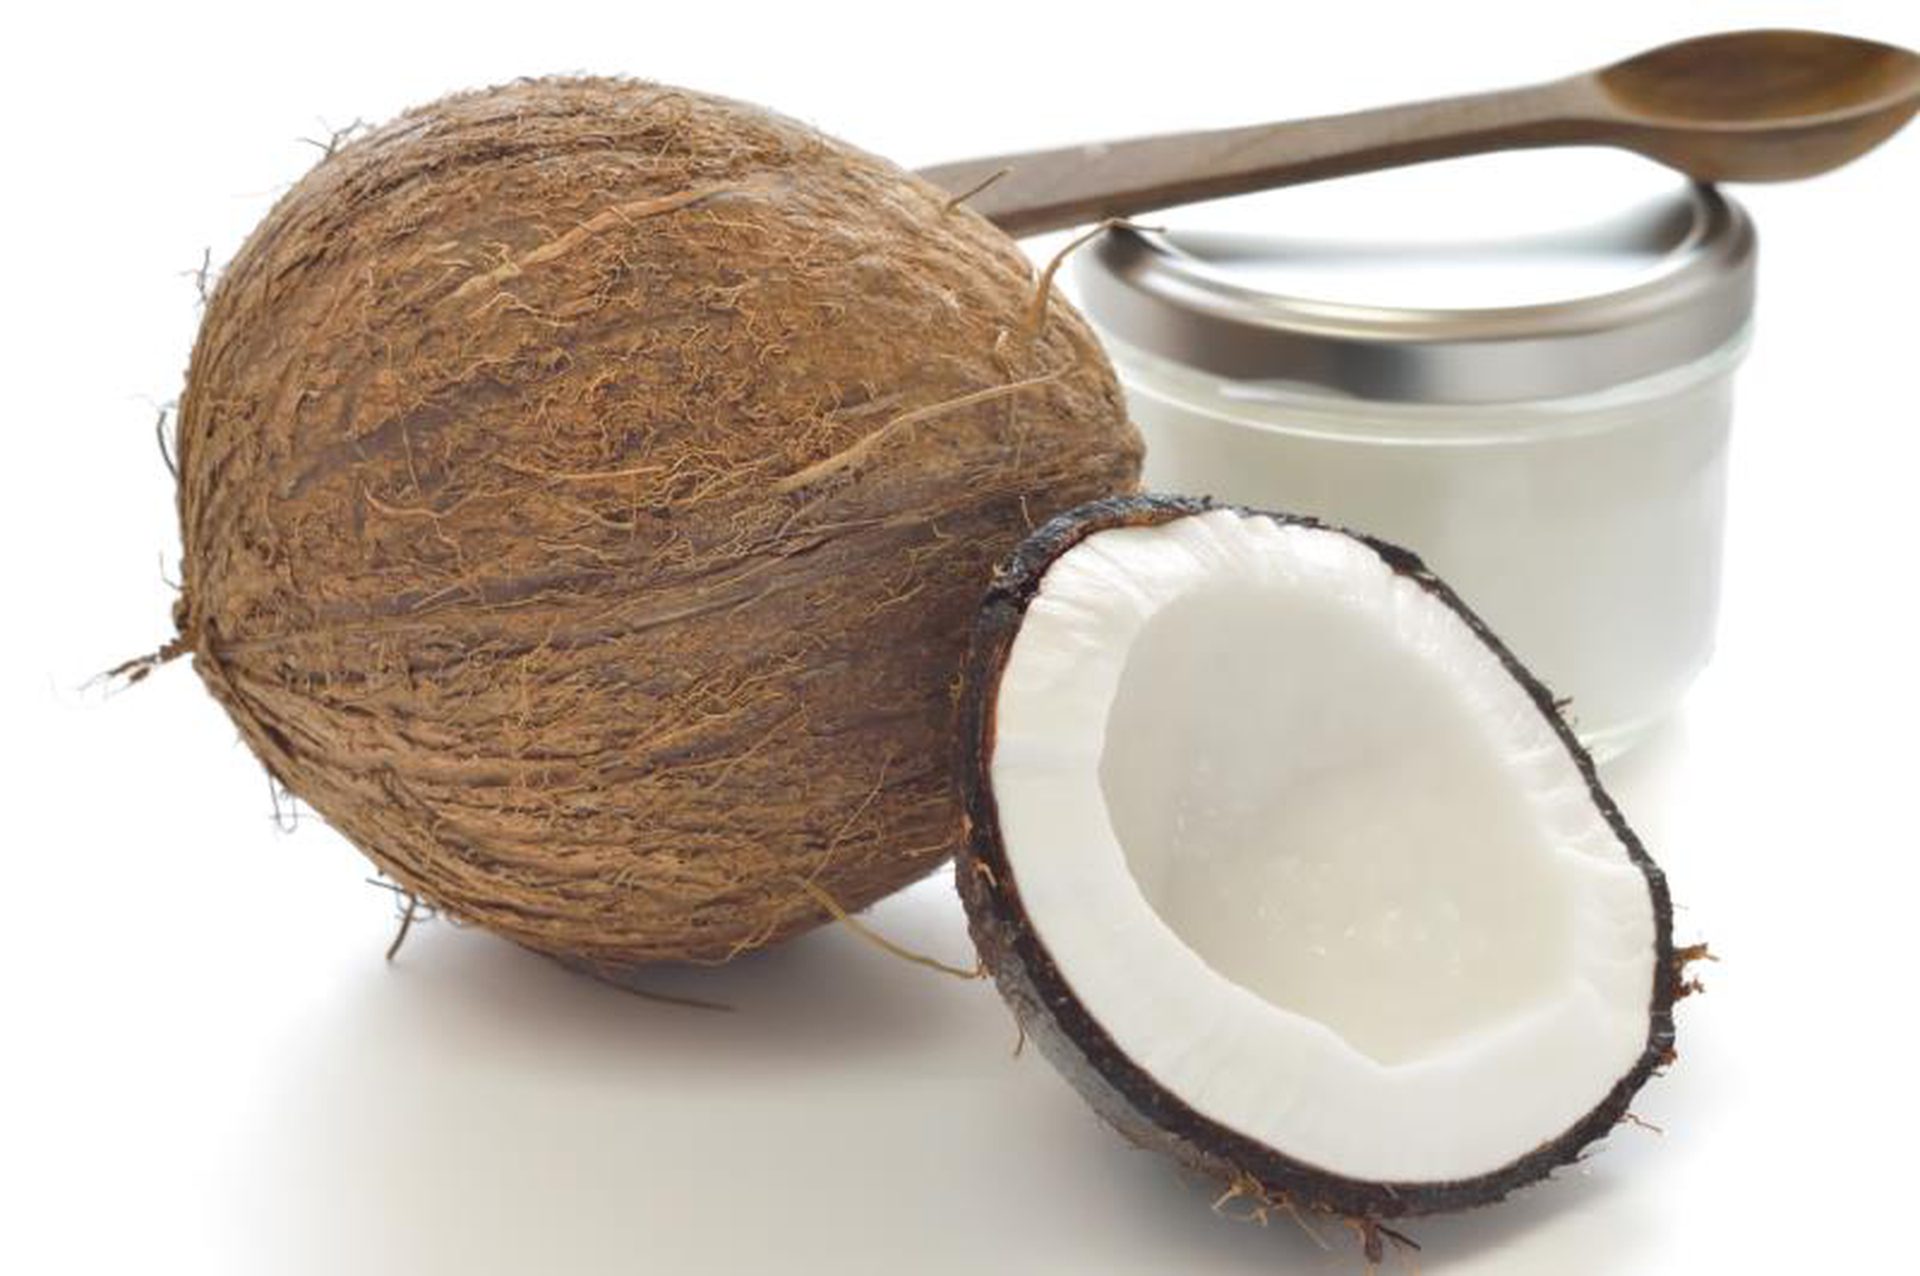 What Are the Benefits of Creamed Coconut? | LIVESTRONG.COM